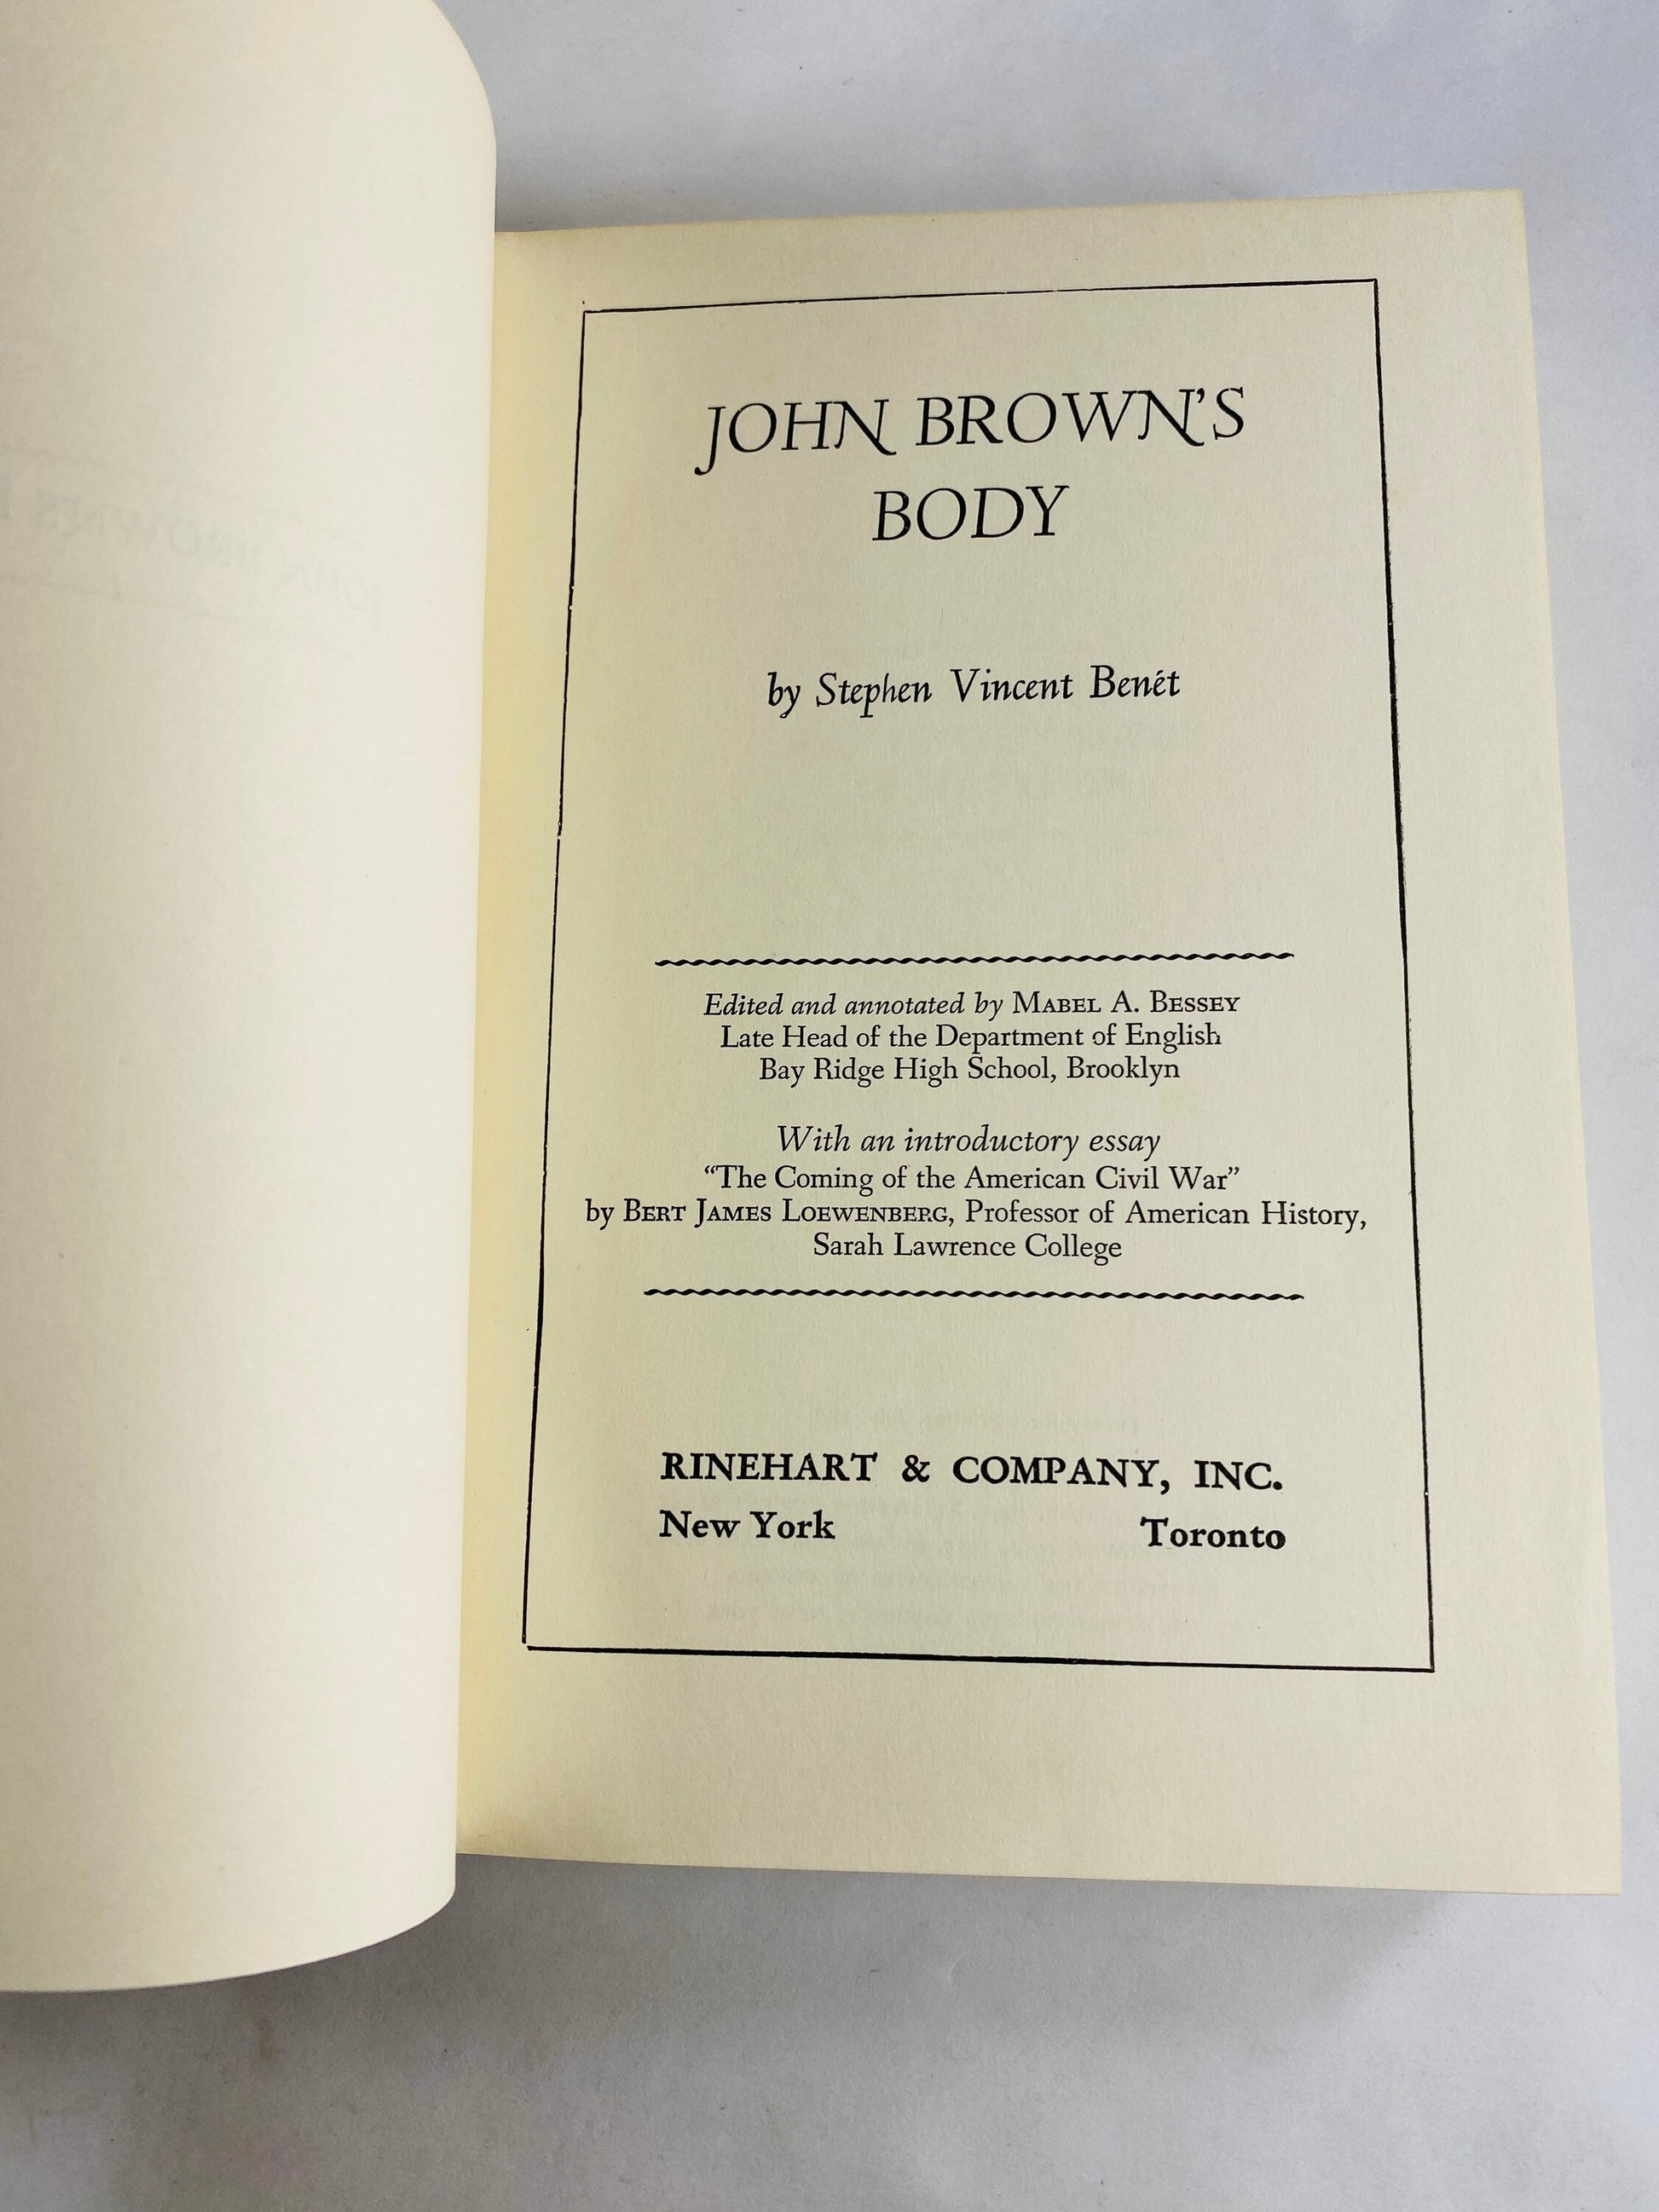 John Brown's Body Vintage book circa 1959 by Stephen Vincent Benet. Epic poem about abolitionist who raided Harpers Ferry. Civil War